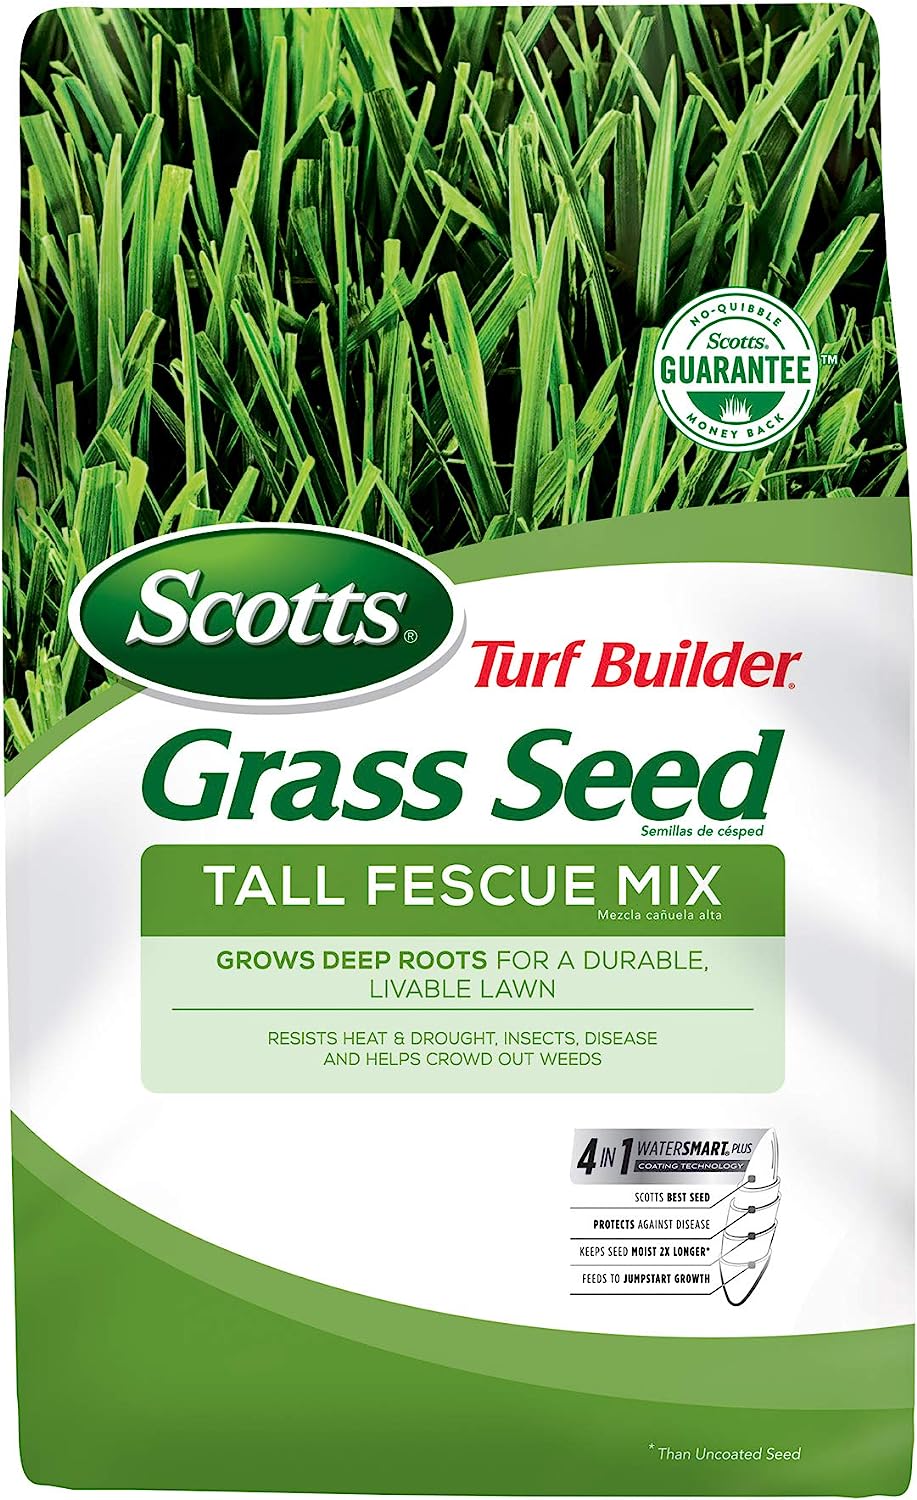 Scotts Turf Builder Grass Seed Tall Fescue Mix, 7 lb. [...]